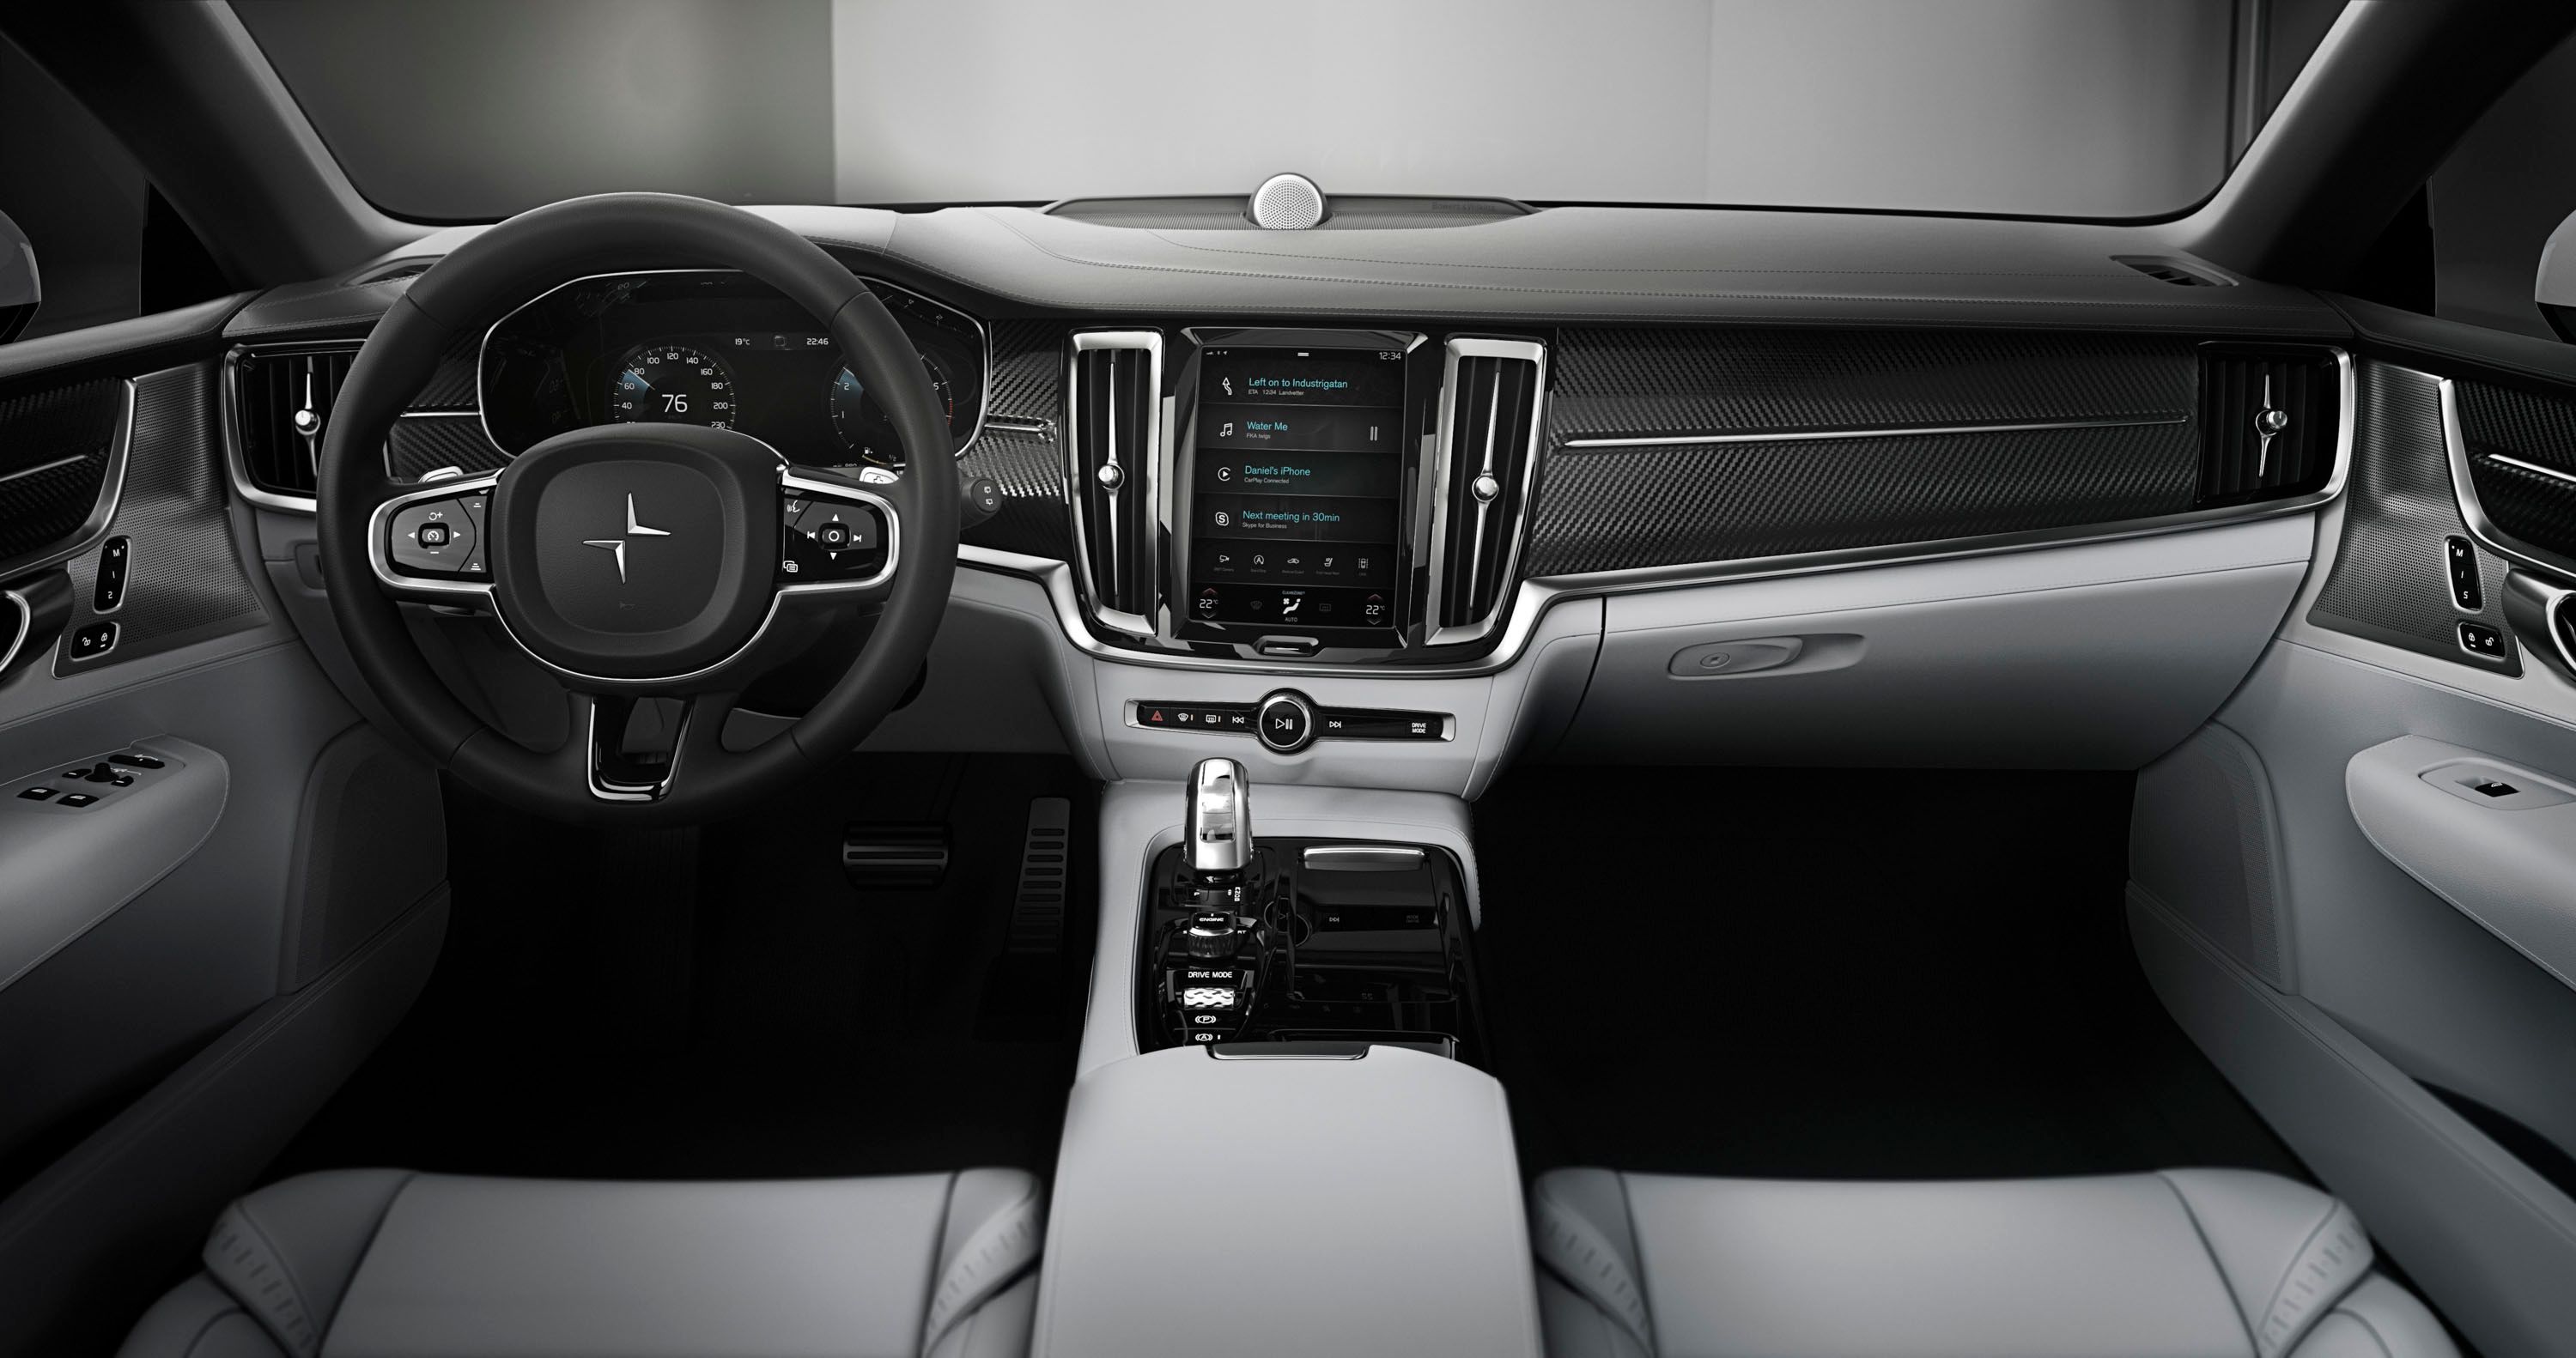 Cabin layout taken from the Volvo S90 